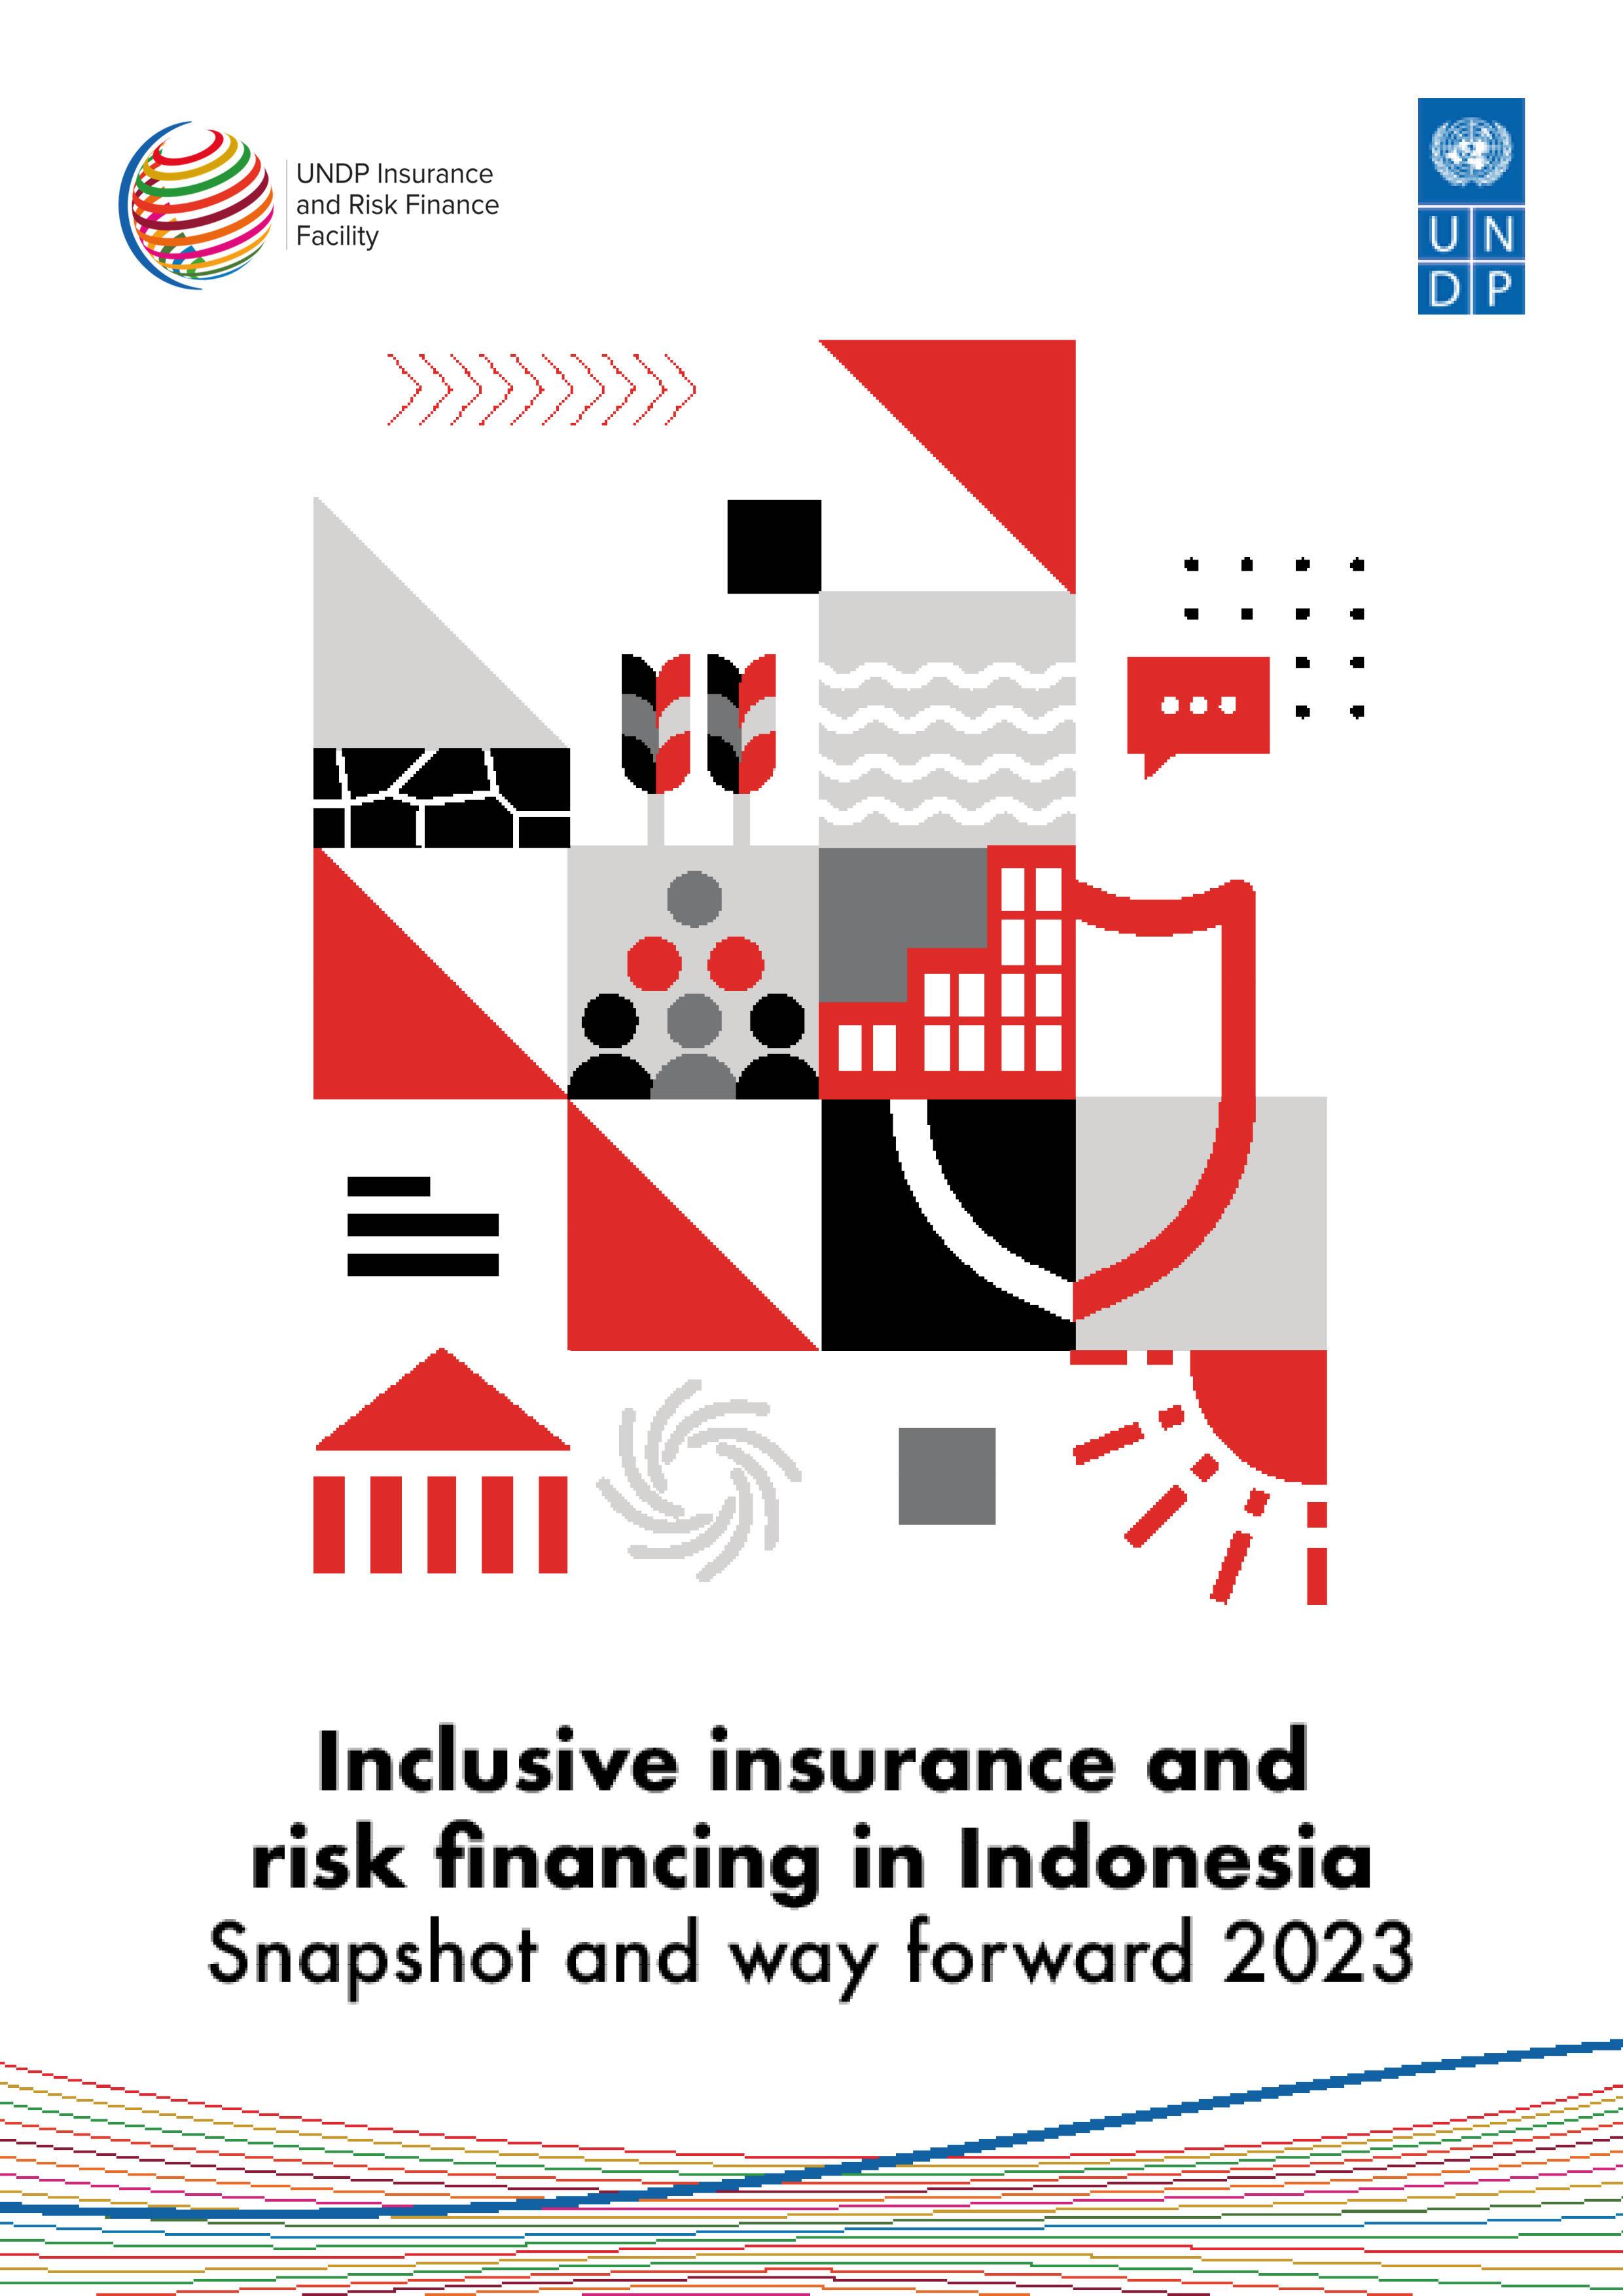 Inclusive insurance and risk financing in Indonesia. Snapshot and way forward 2023